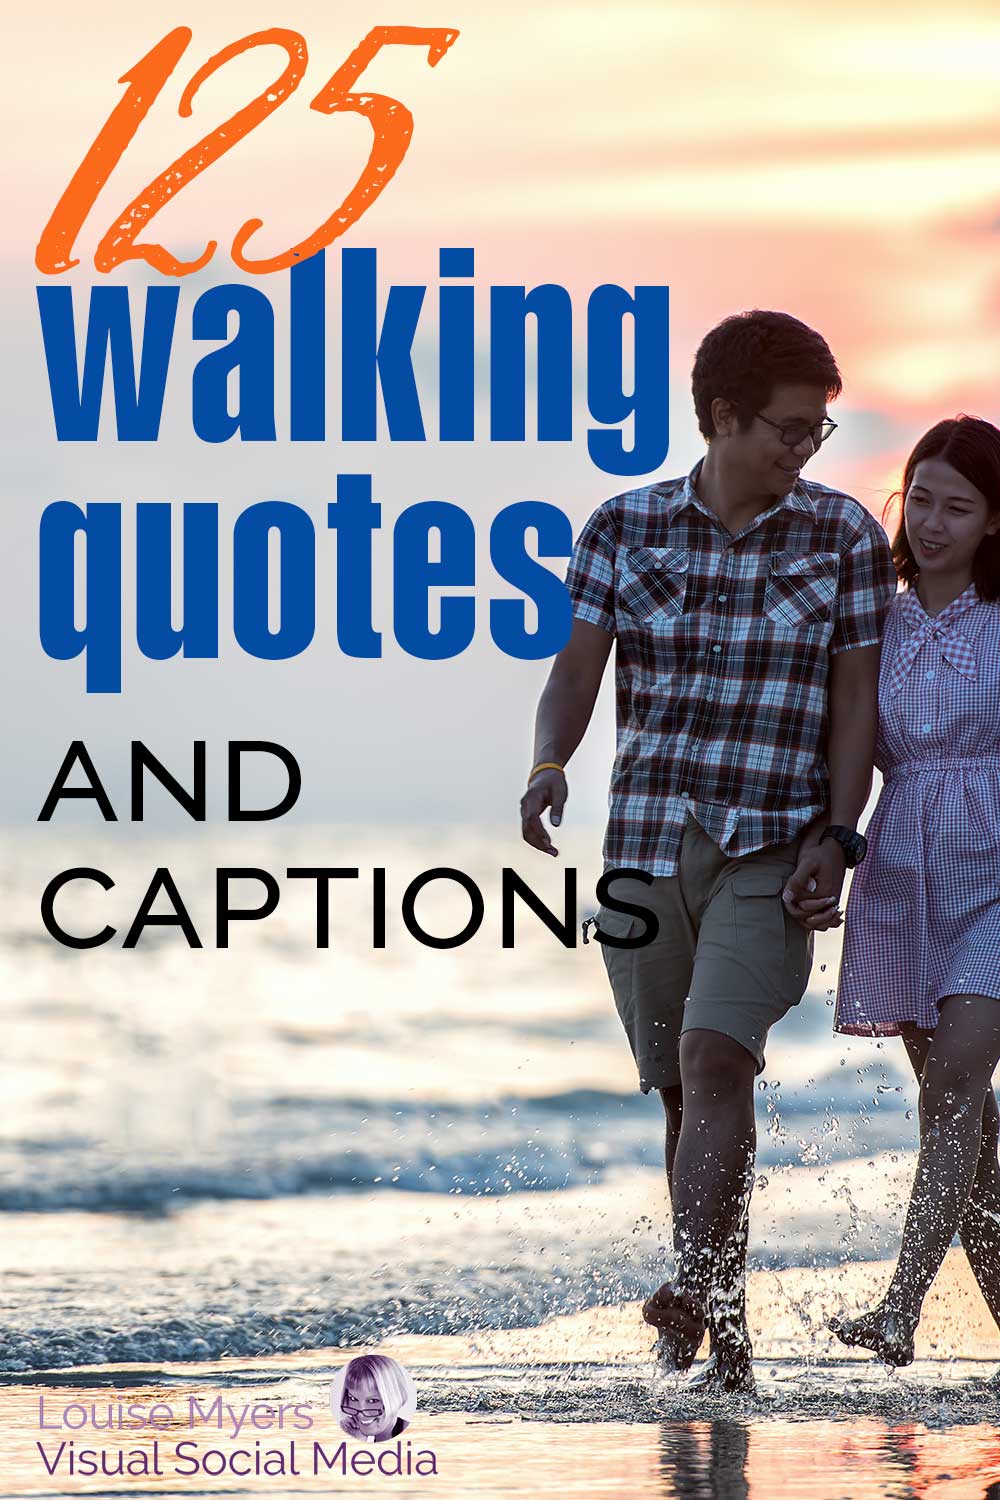 couple walking on the beach has words 125 walking quotes and captions.